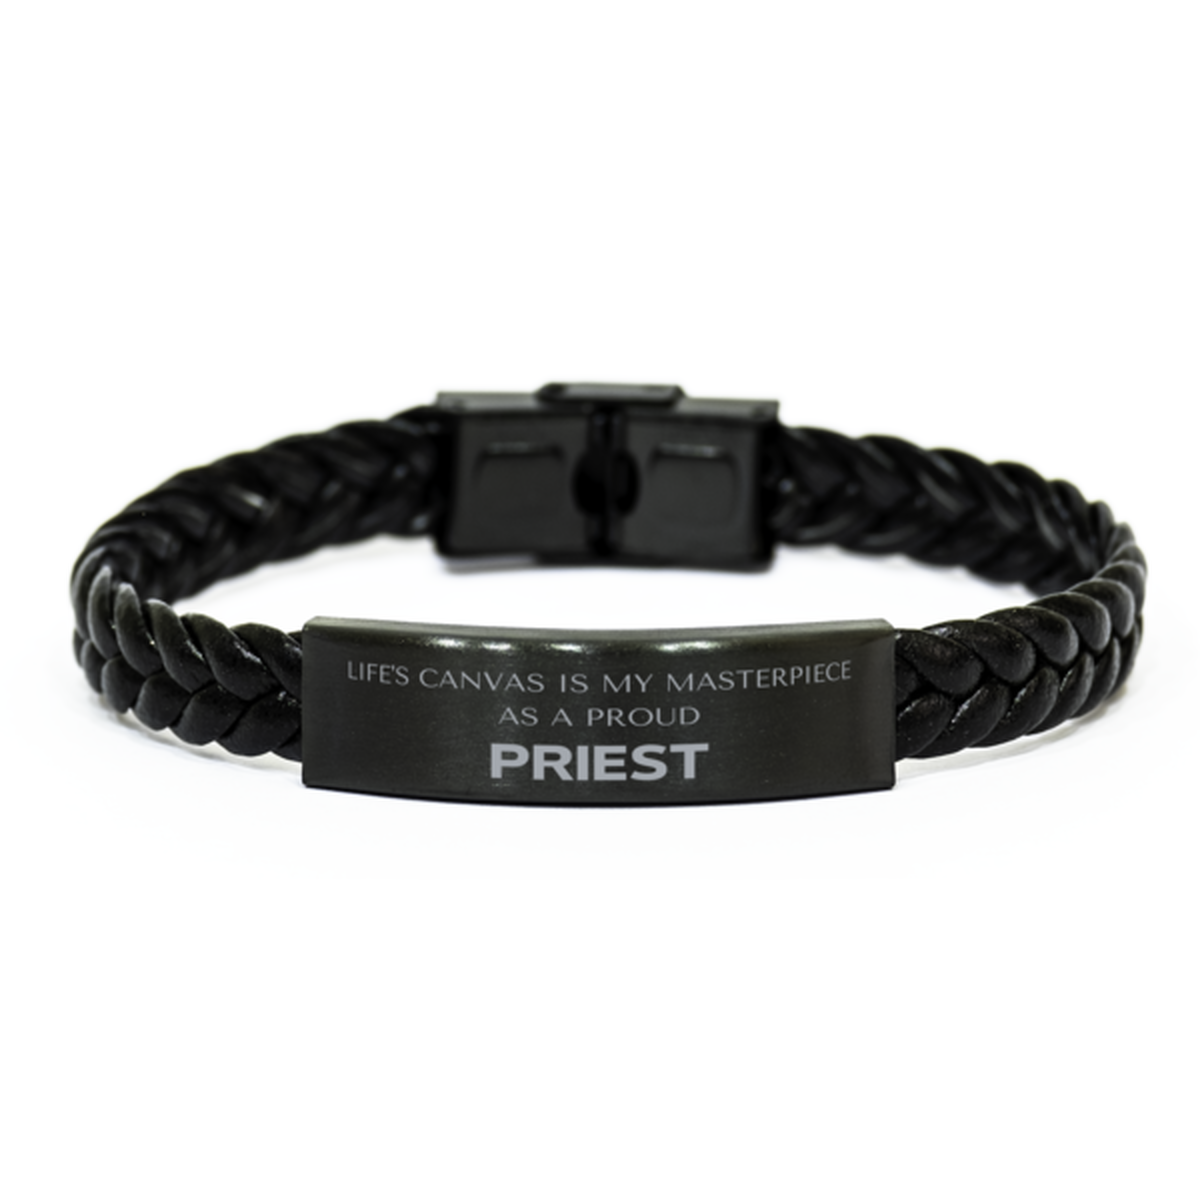 Proud Priest Gifts, Life's canvas is my masterpiece, Epic Birthday Christmas Unique Braided Leather Bracelet For Priest, Coworkers, Men, Women, Friends